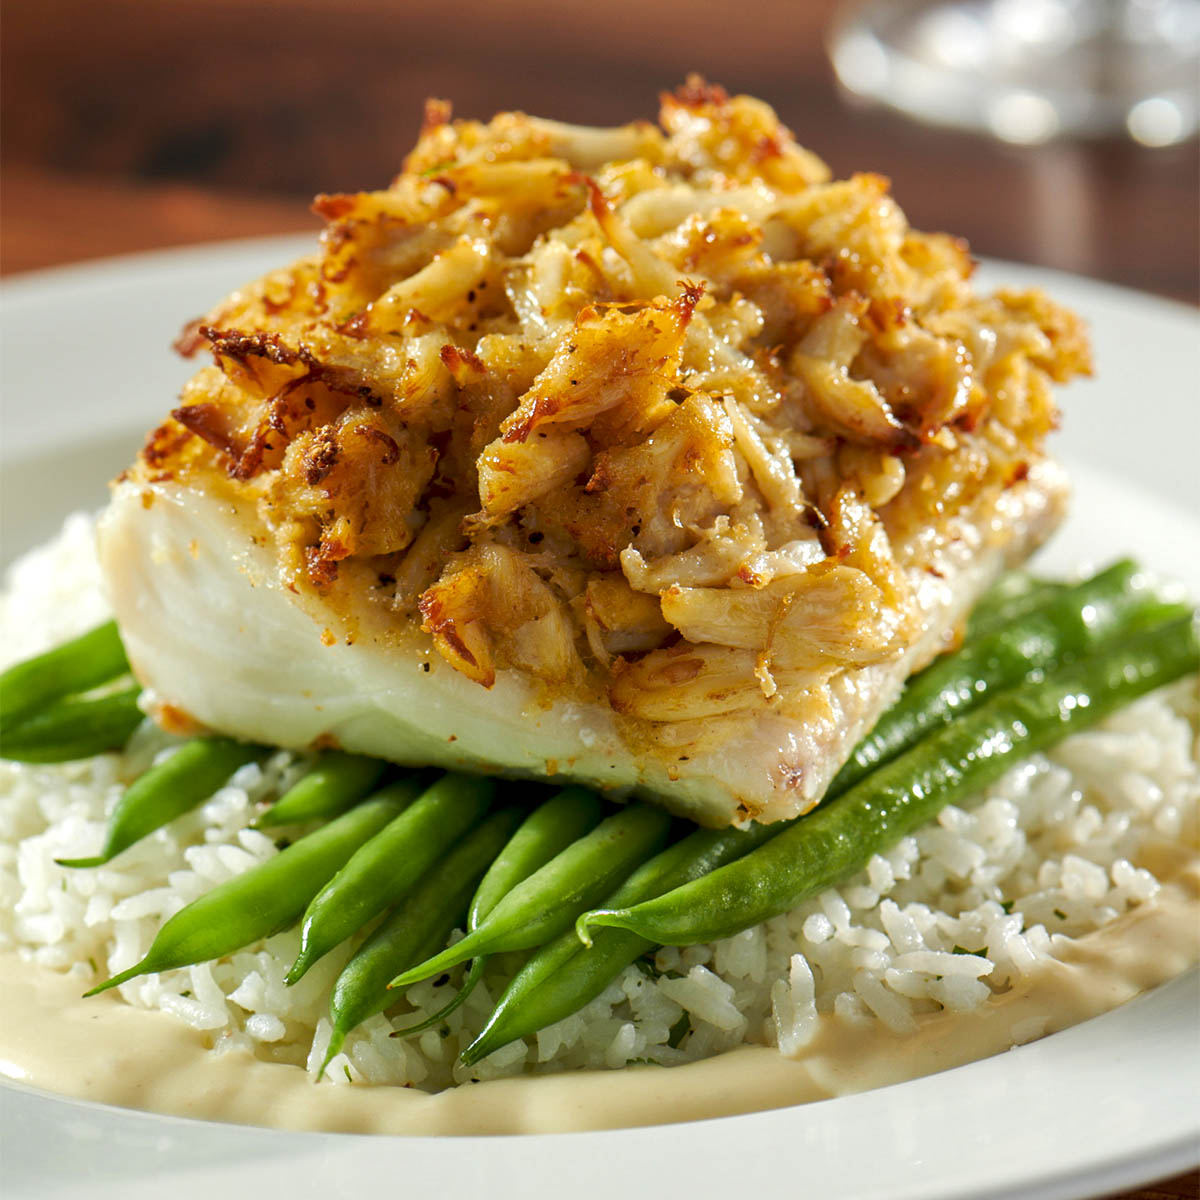 Burtons crab crusted haddock atop fresh green beans and fluffy rice at the South Windsor location